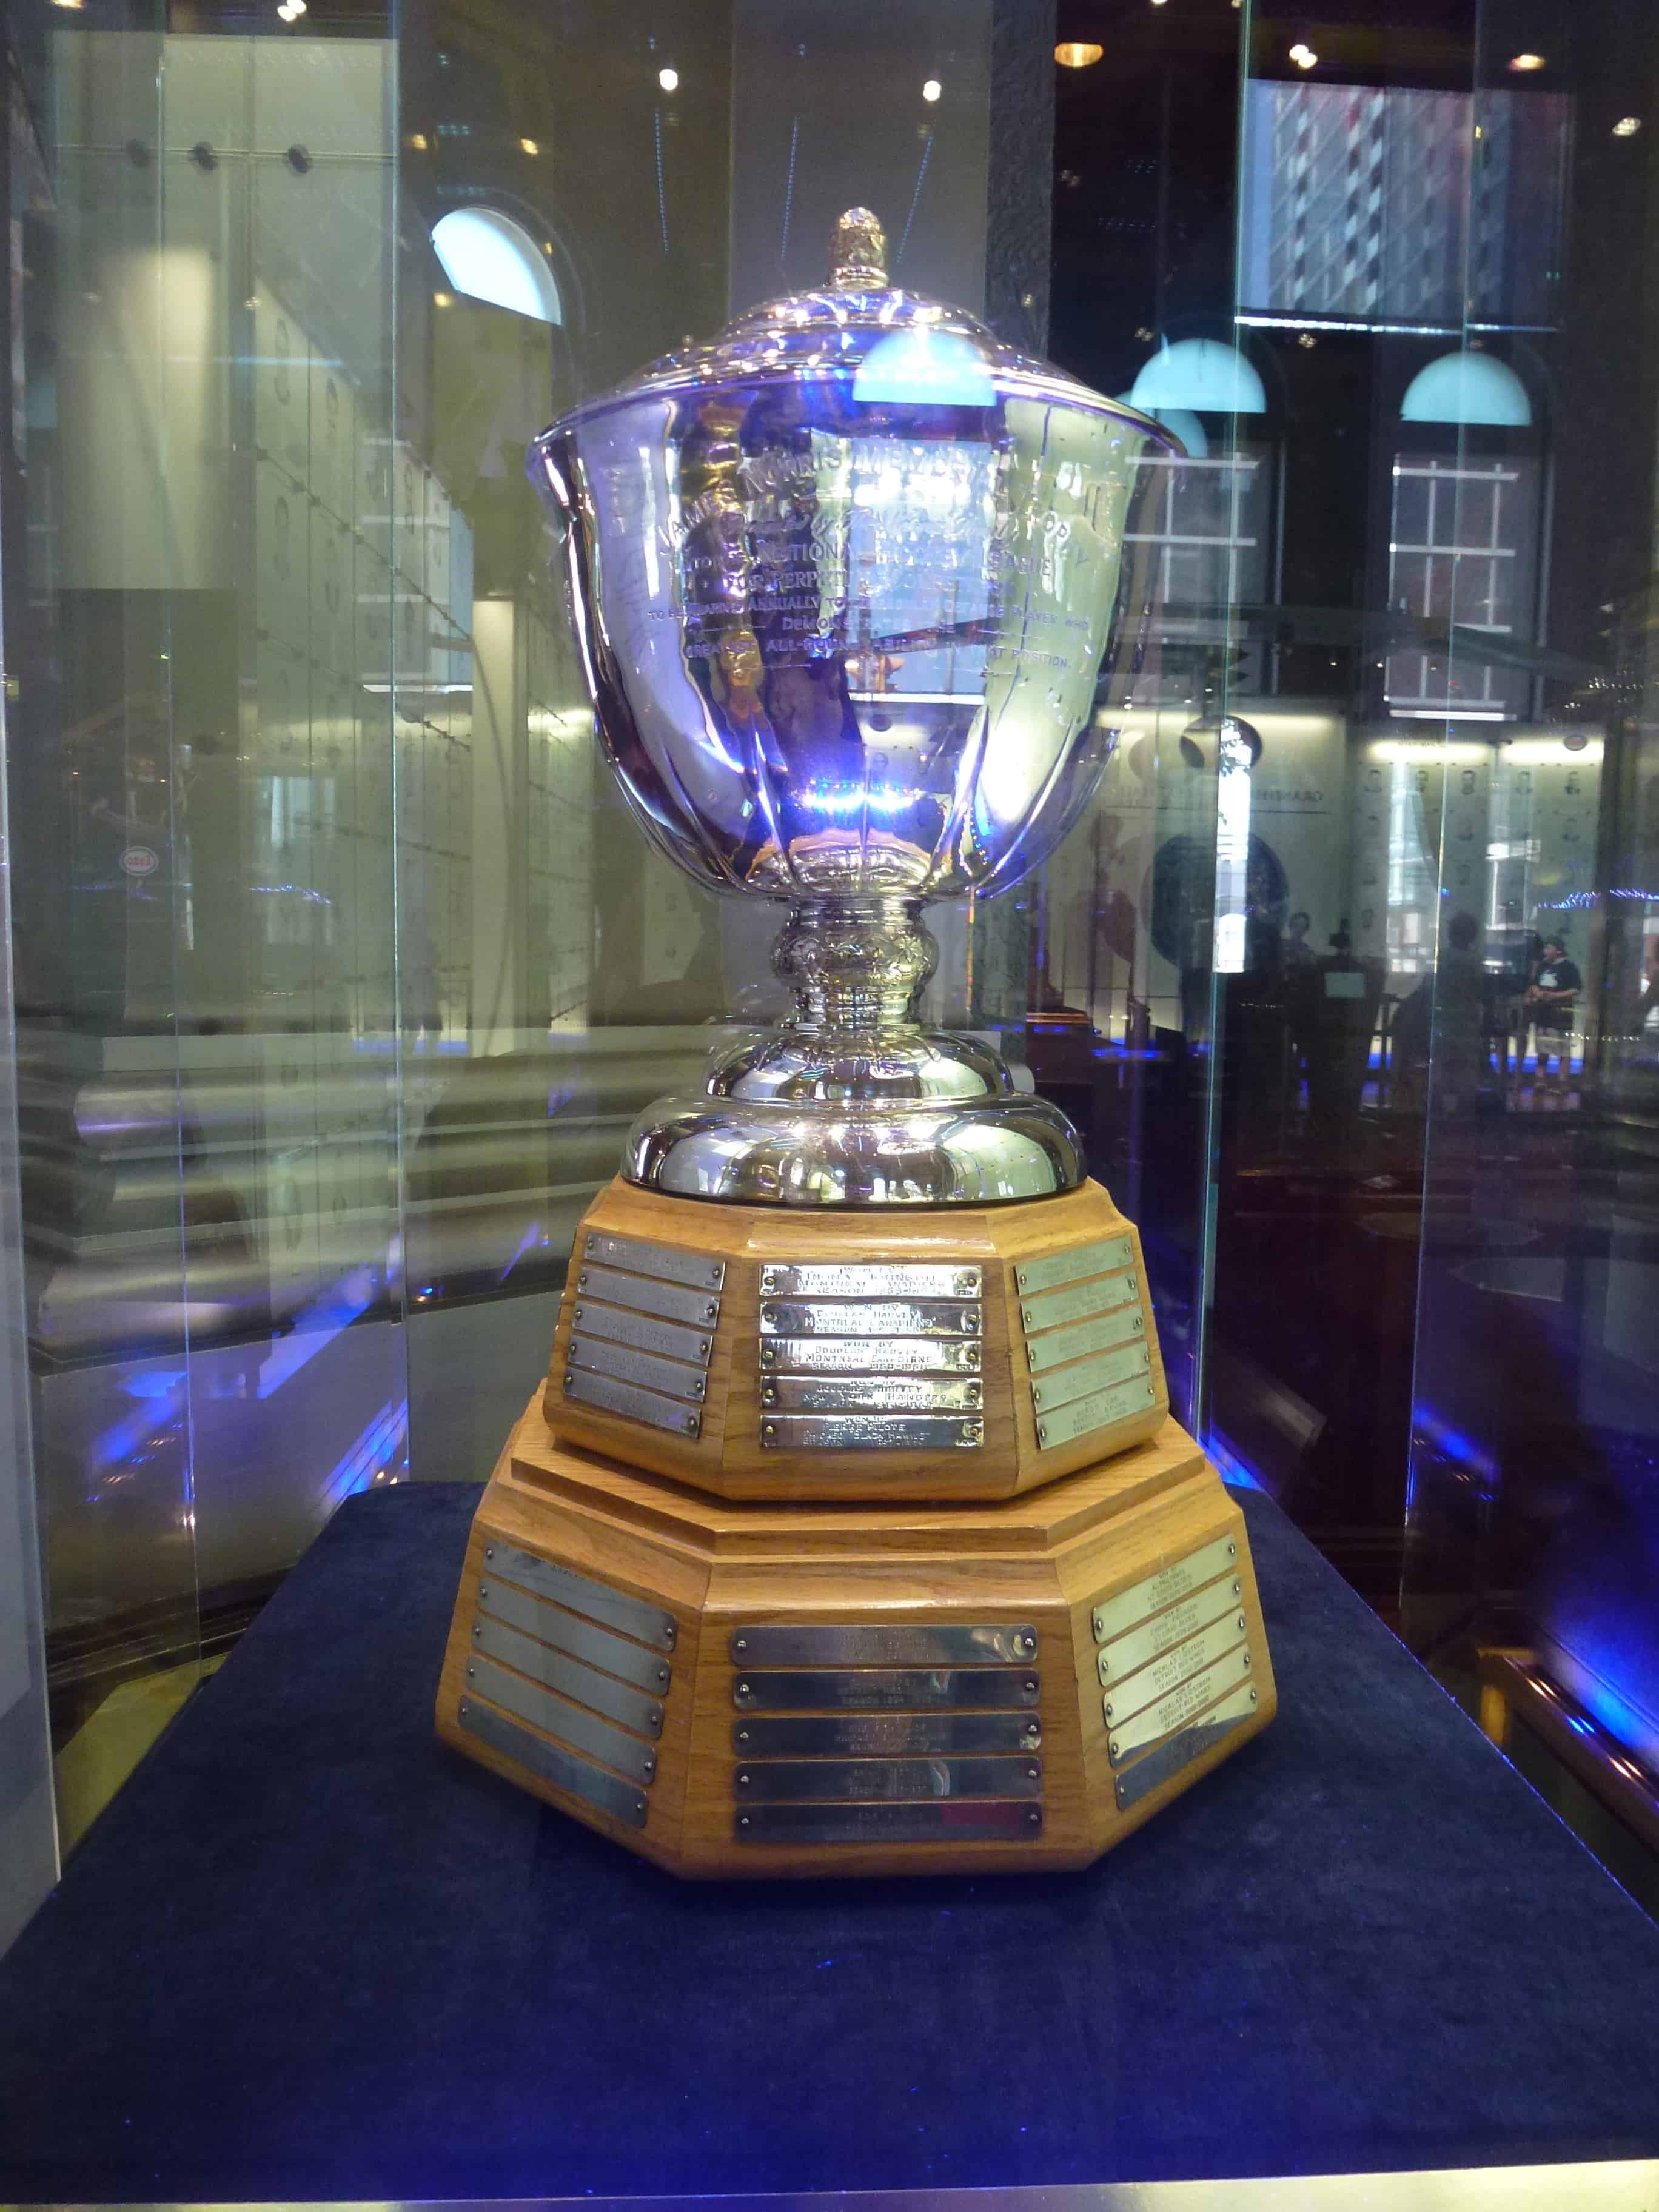 Norris Trophy at the Hockey Hall of Fame in Toronto, Ontario, Canada